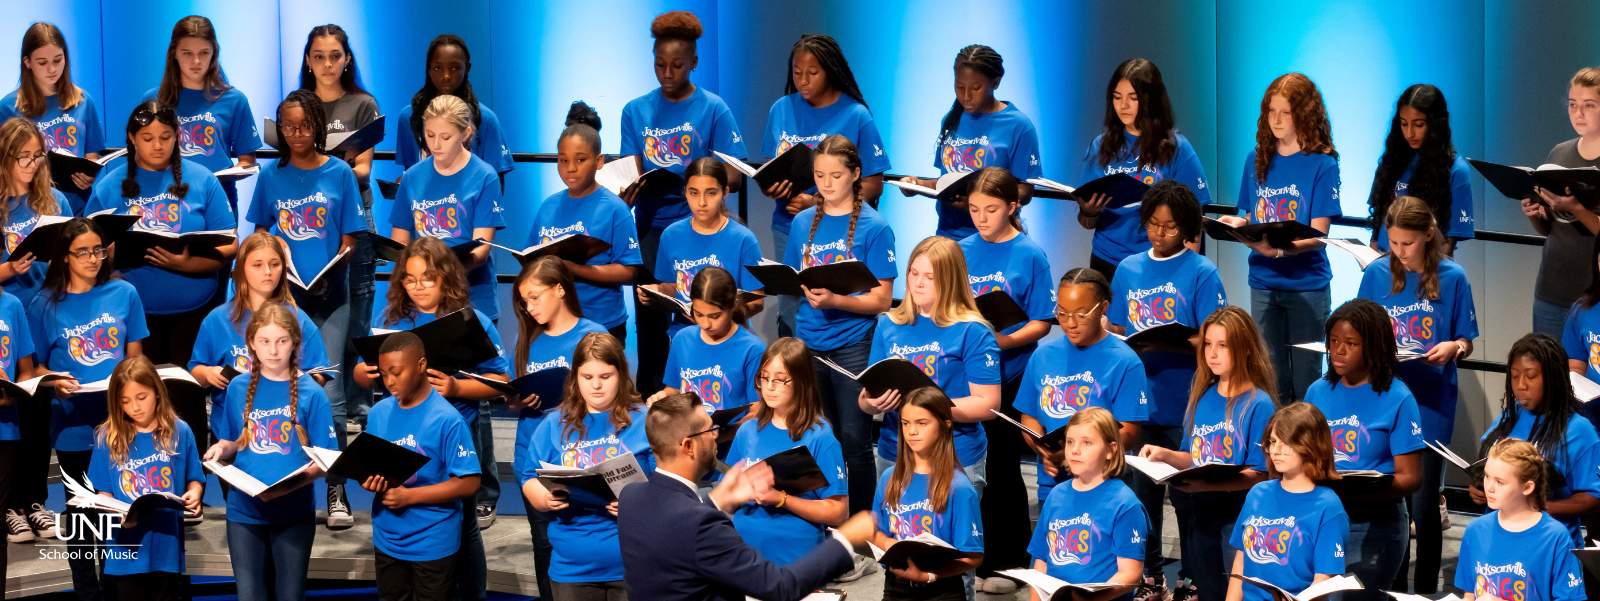 Students in blue shirts singing in choir.